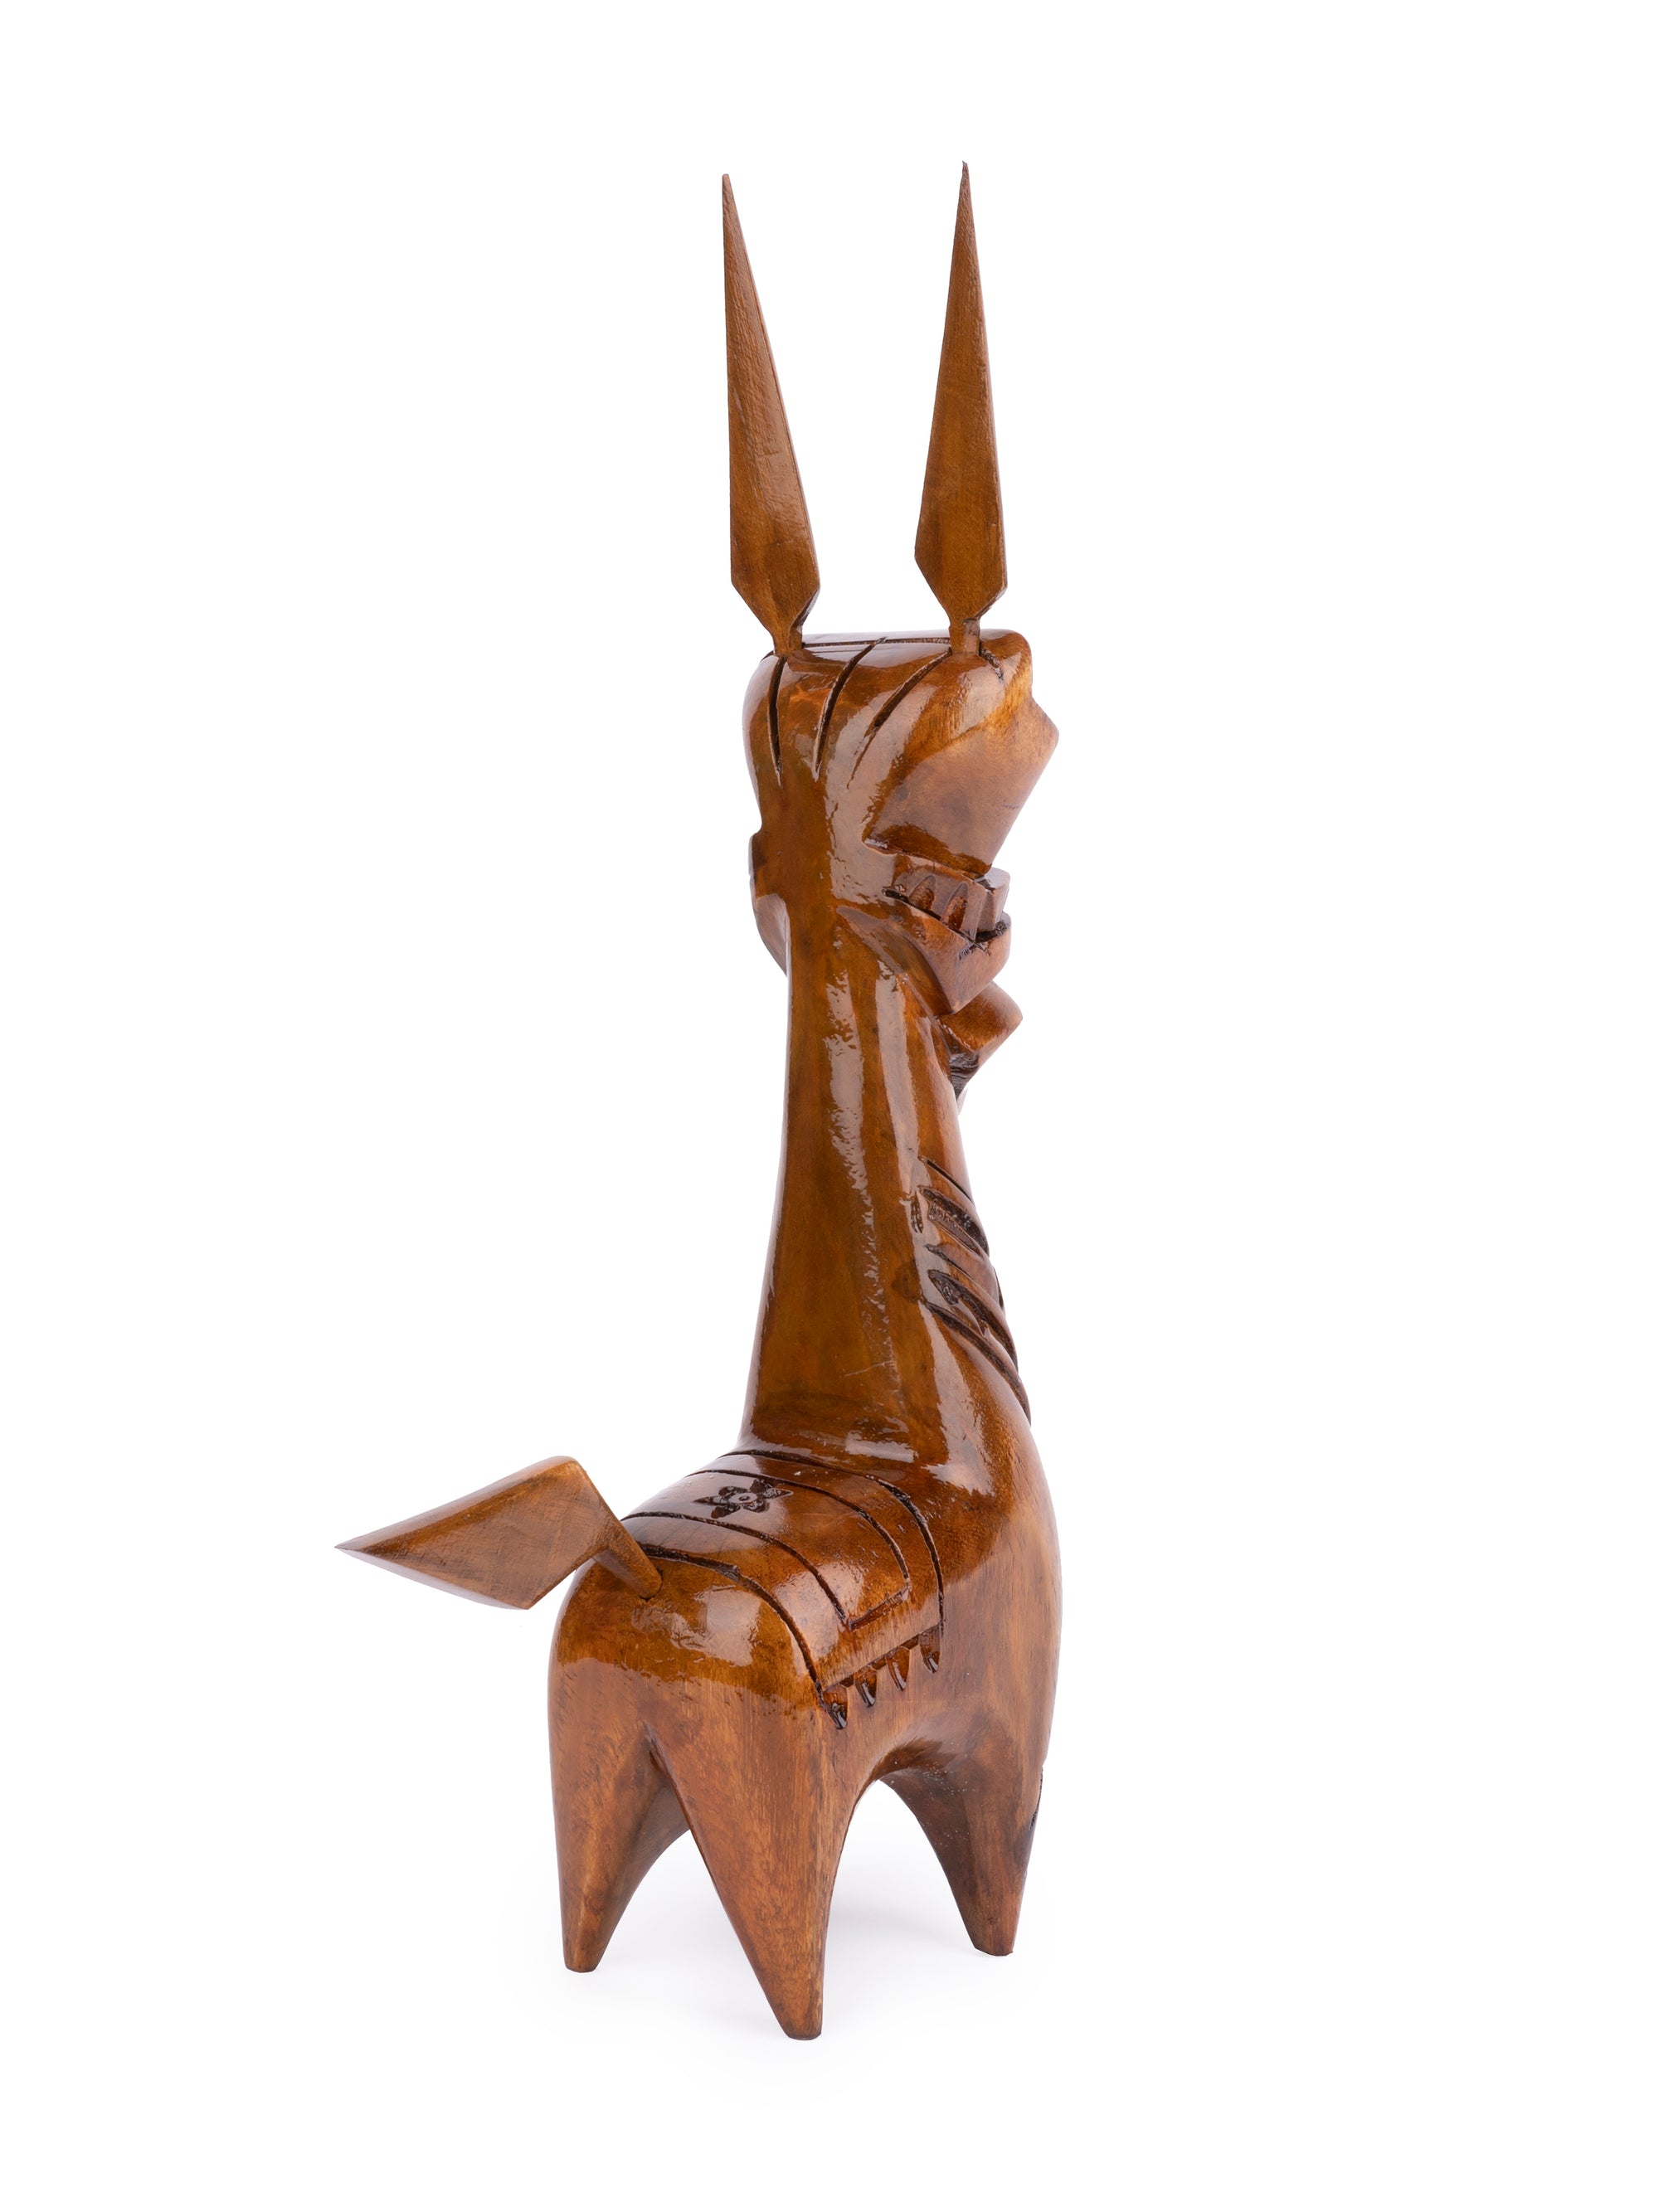 Wooden Handmade Traditional Horse famous worldwide as Terracotta Horse - 16 inches height - The Heritage Artifacts